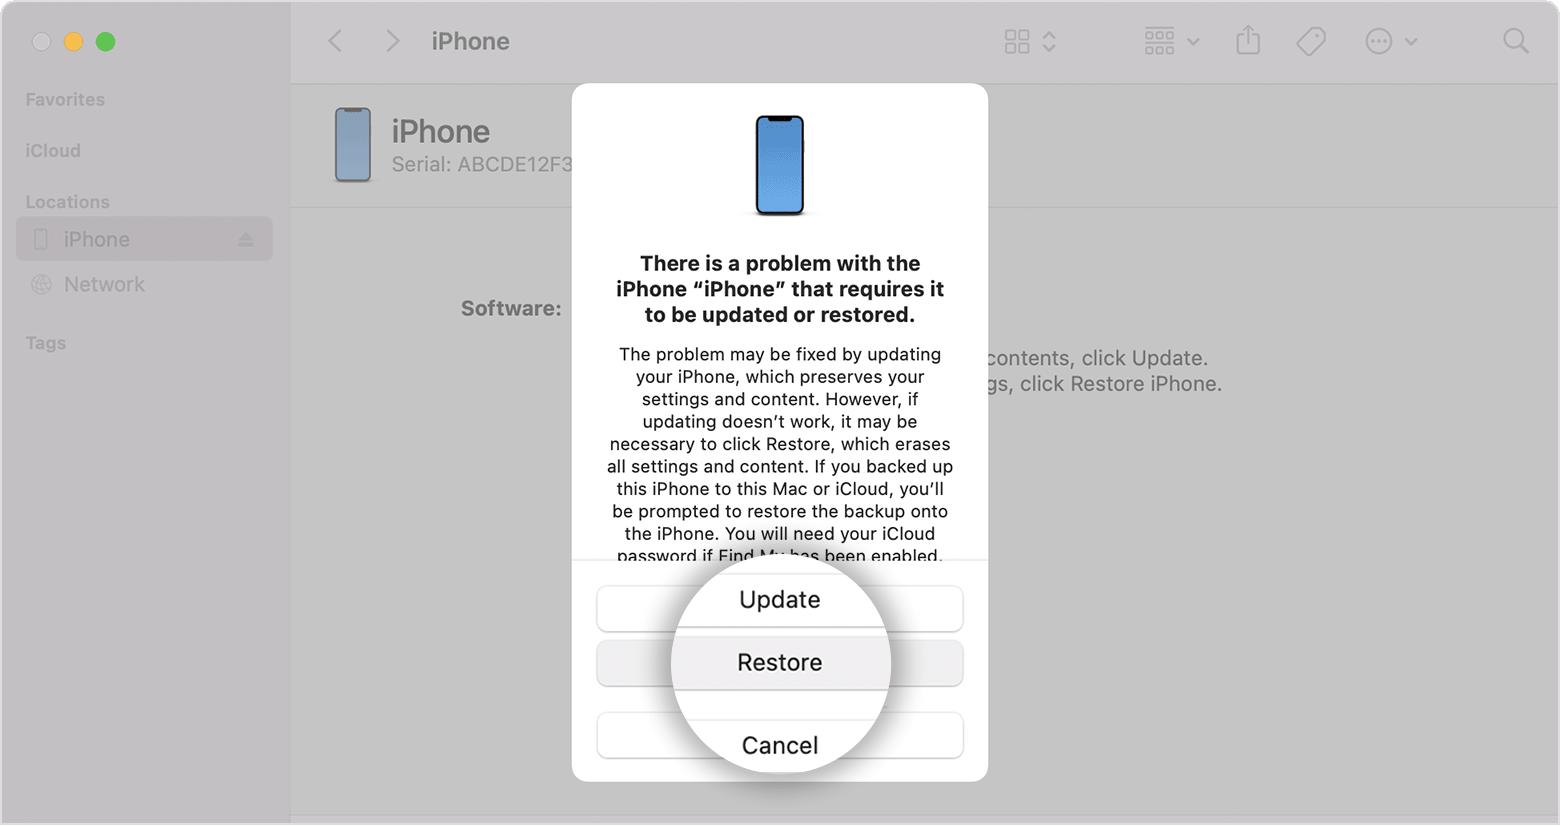 You can restore your iPhone through Finder after you connect your iPhone to your computer.